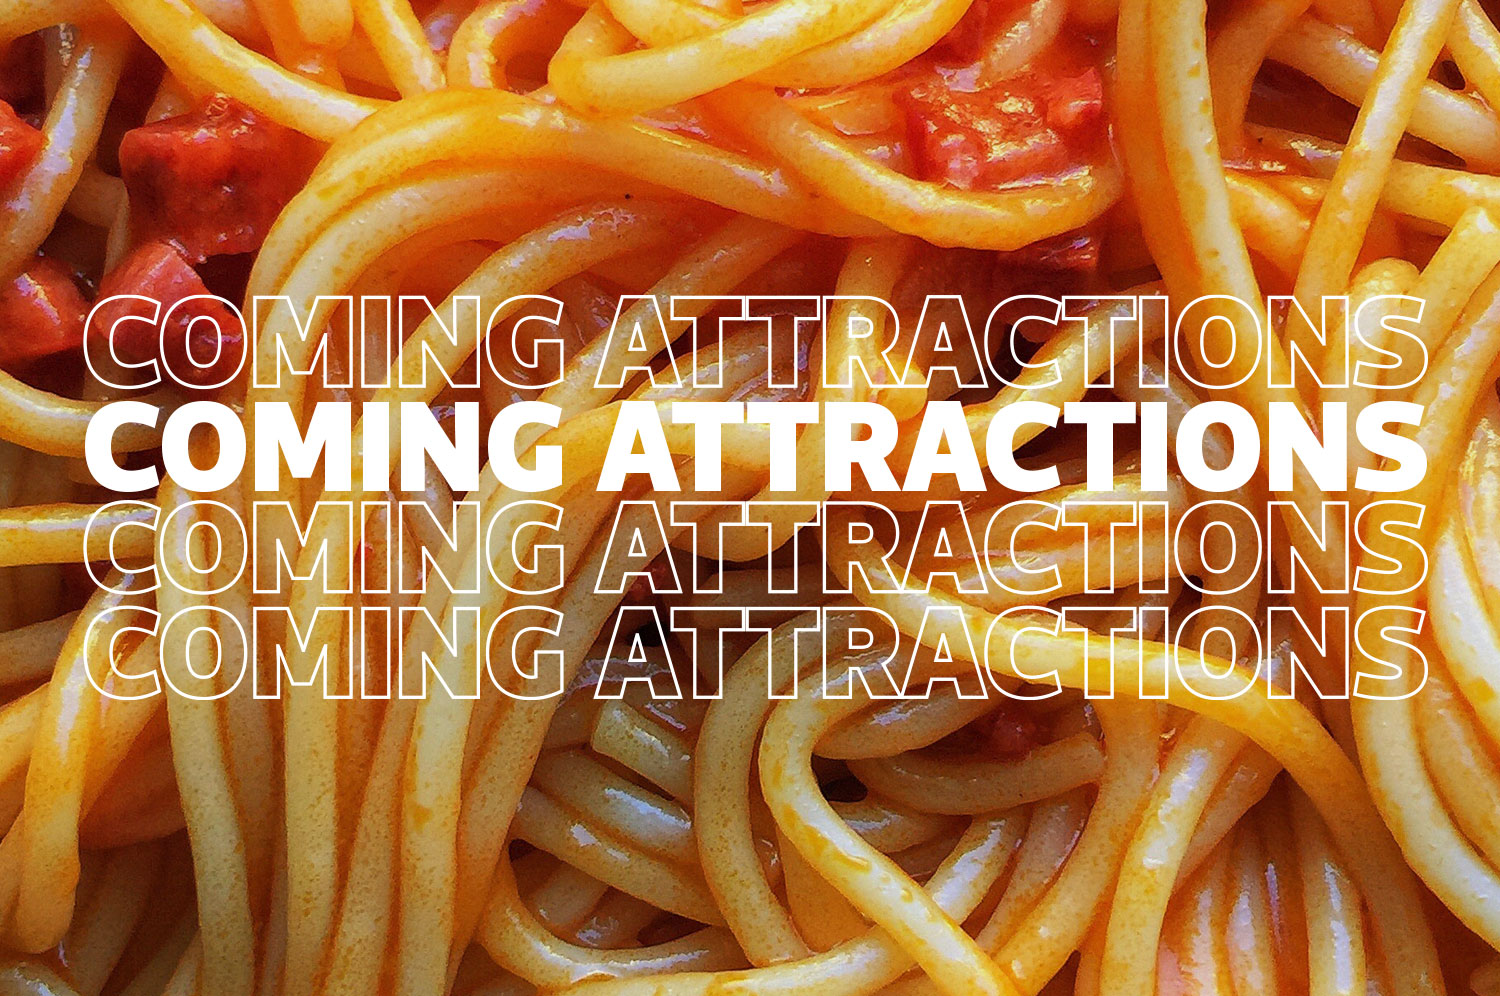 spaghetti with the words “coming attractions” over it